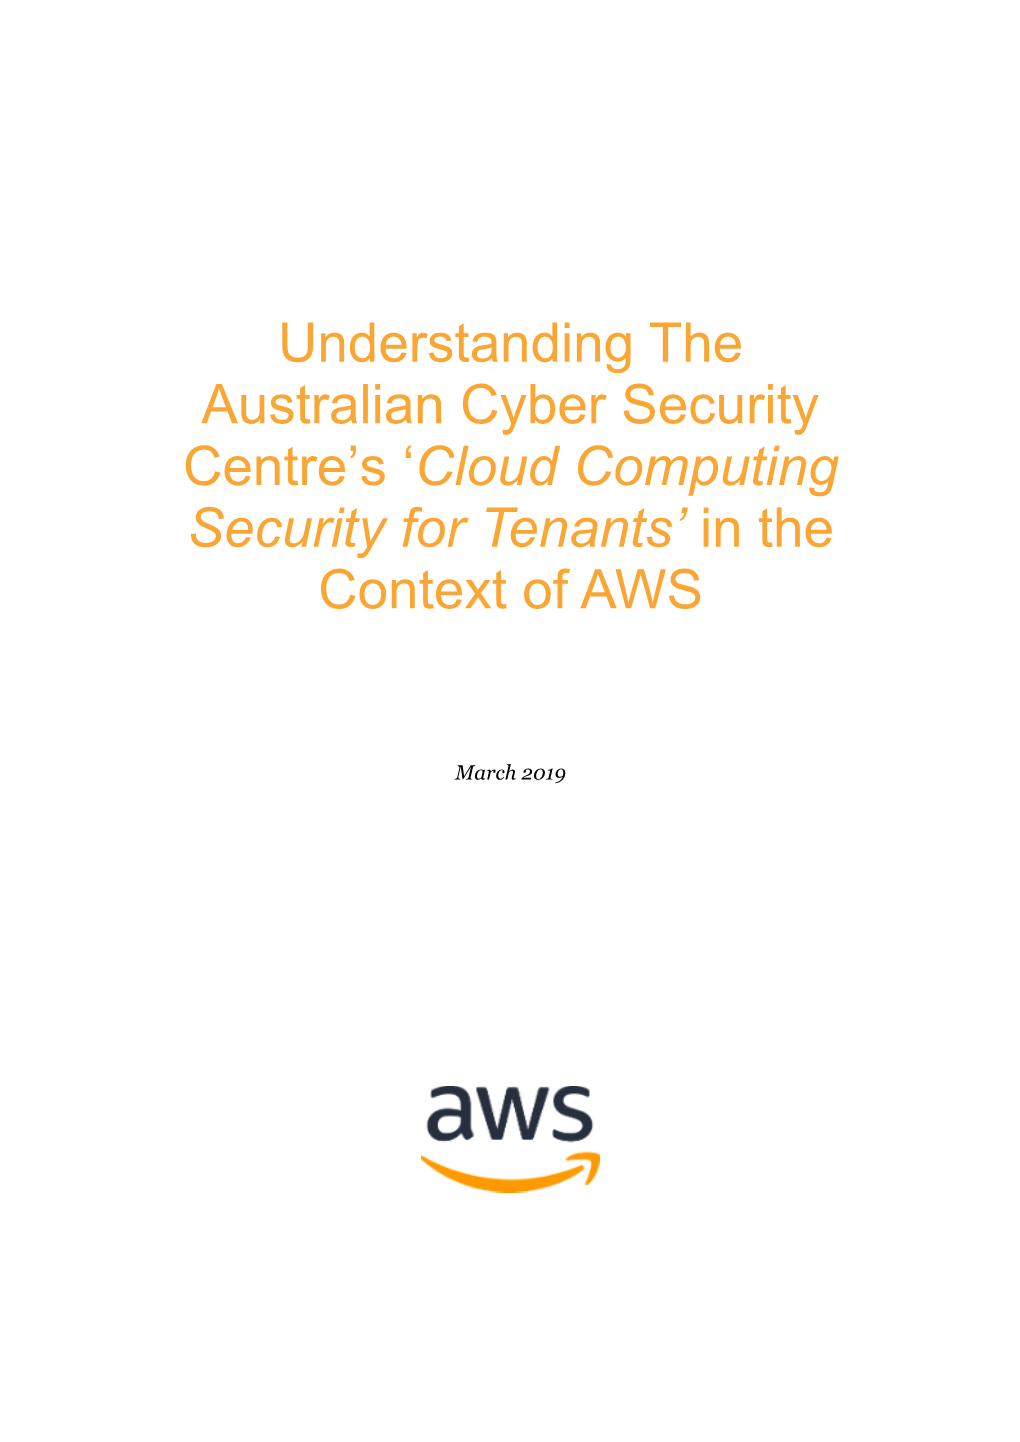 'Cloud Computing Security for Tenants' in the Context Of